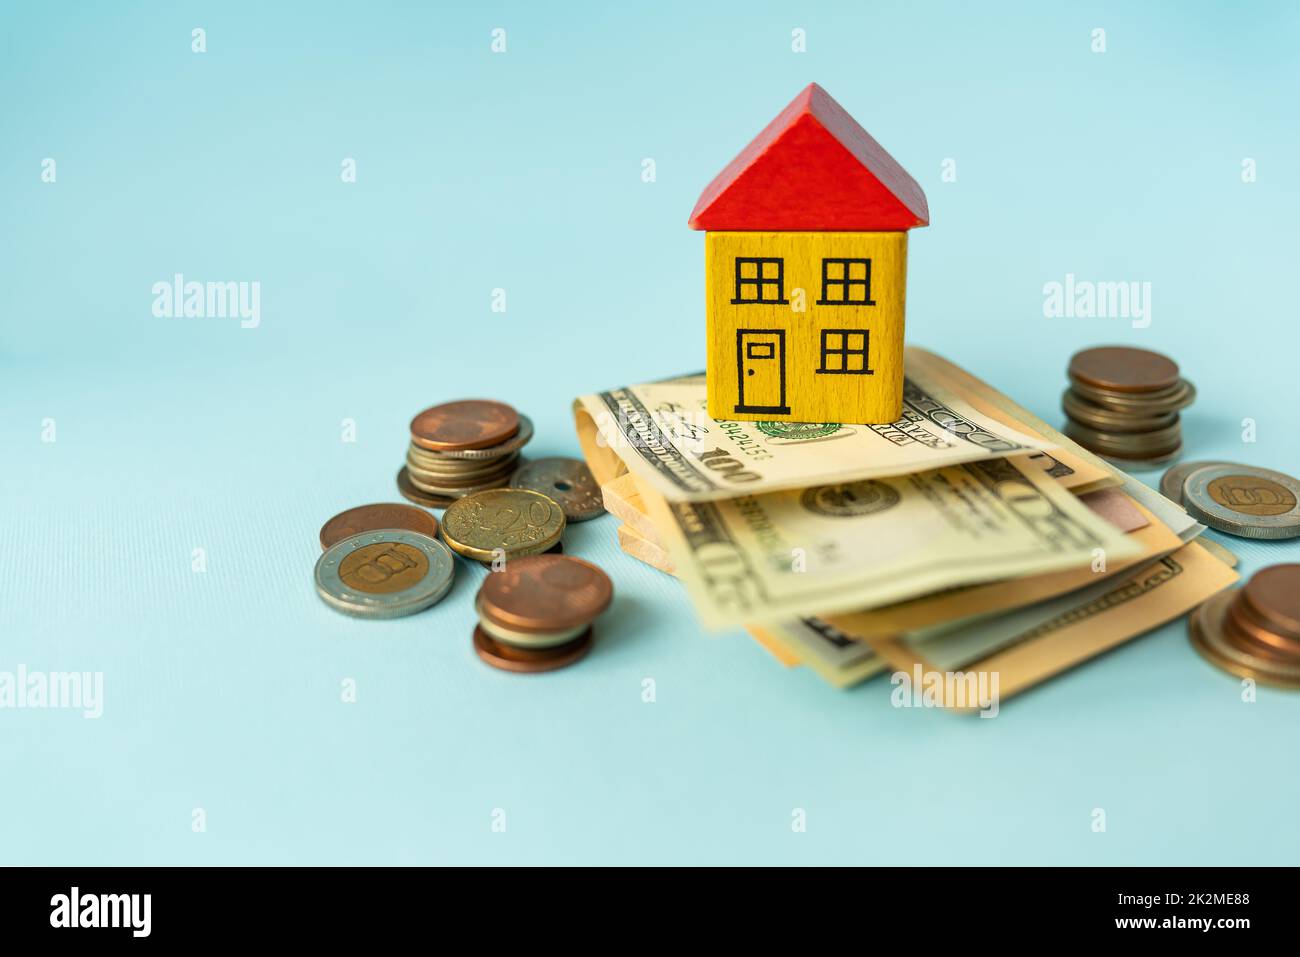 Money in international currency, including euro, dollar, a coin on which there is a toy house. The concept of mortgages, investments, loans, debts, housing purchases: apartments or houses. Stock Photo